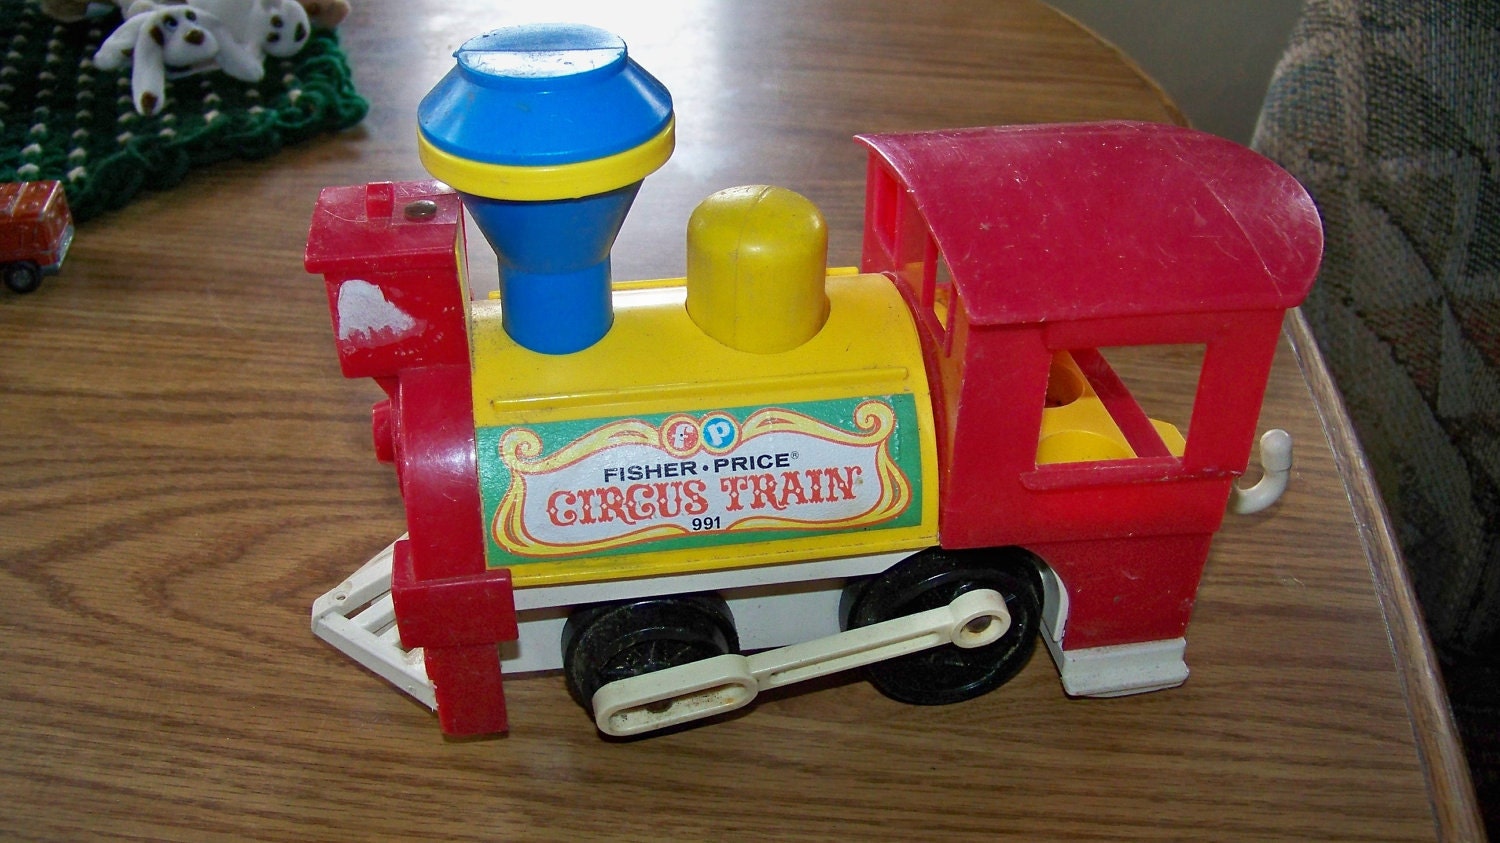 Vintage Fisher Price Little People Engine Circus Train by